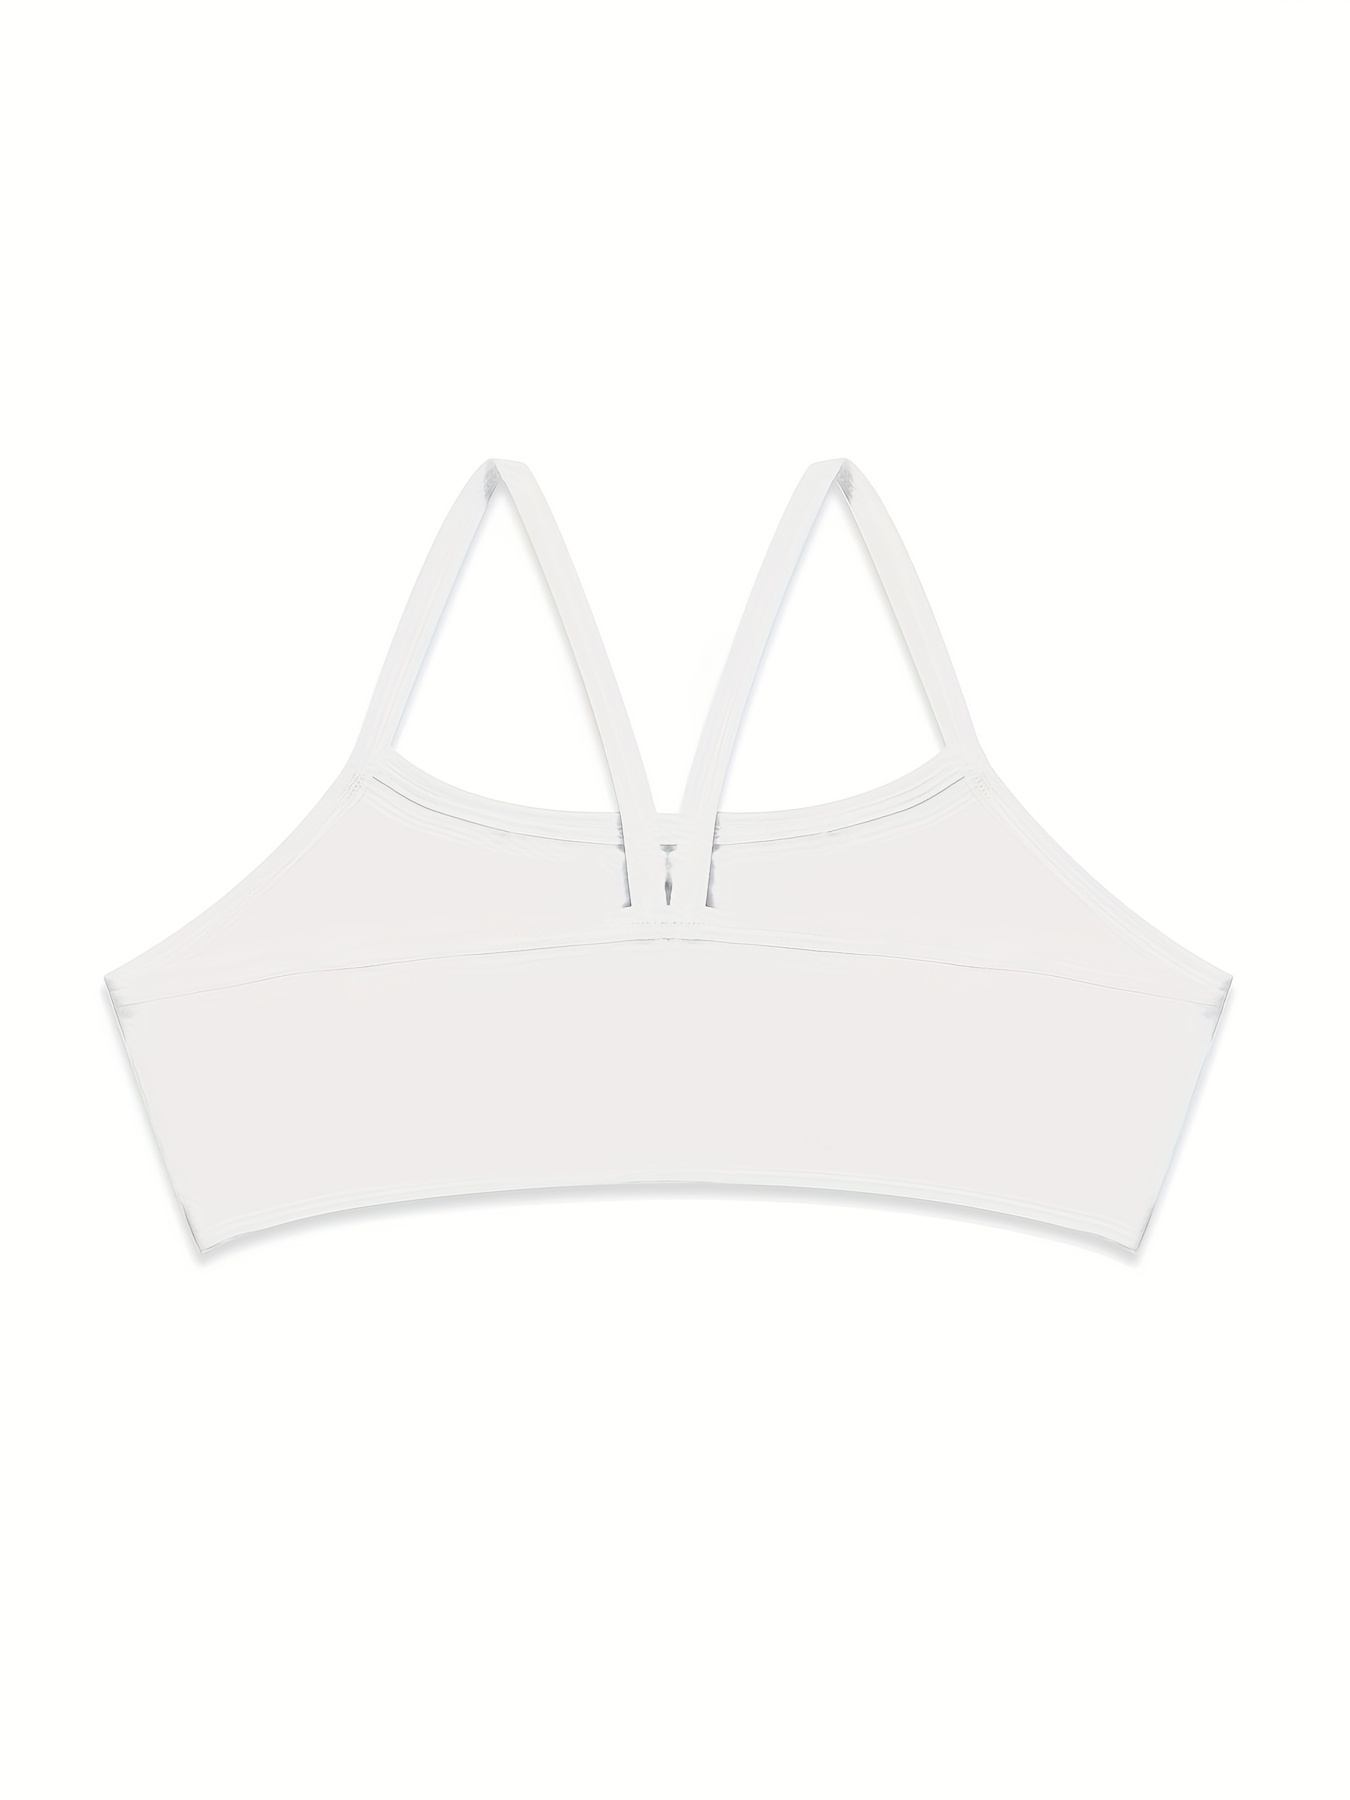 Holiday Style 4pcs Girls Training Bras Stretchy Sports Bralette Sleeveless  Crops Tank Tops Underwears For 6-14 Years Old Kids